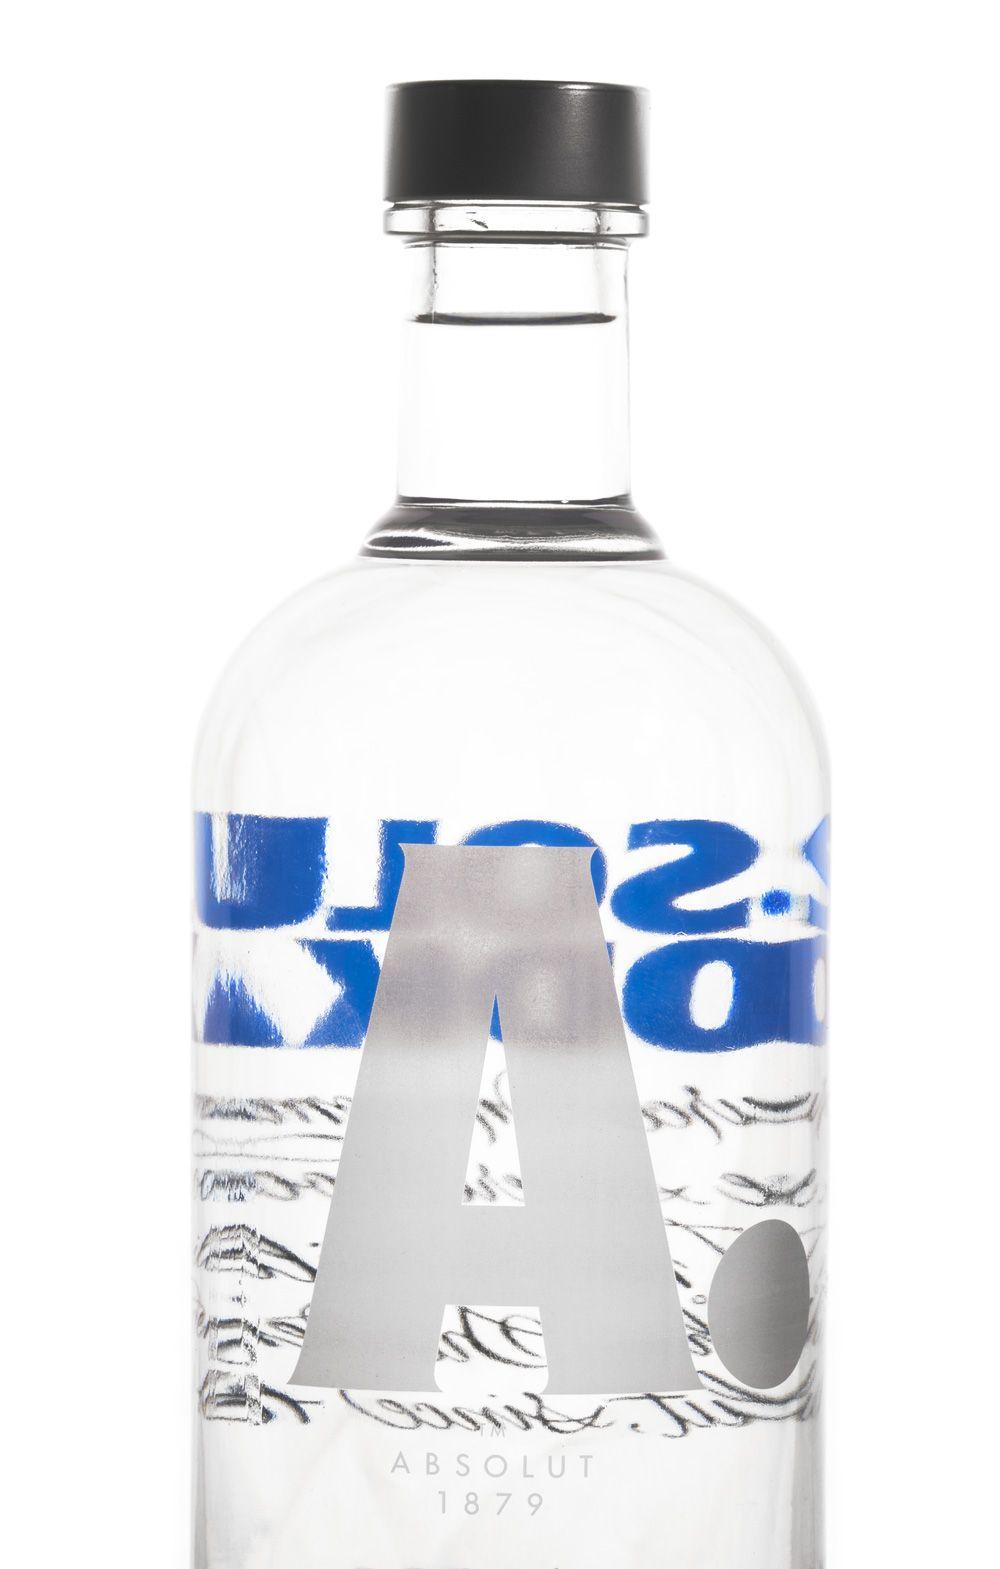 Absolut Logo - Brand New: New Packaging for Absolut Vodka by The Brand Union